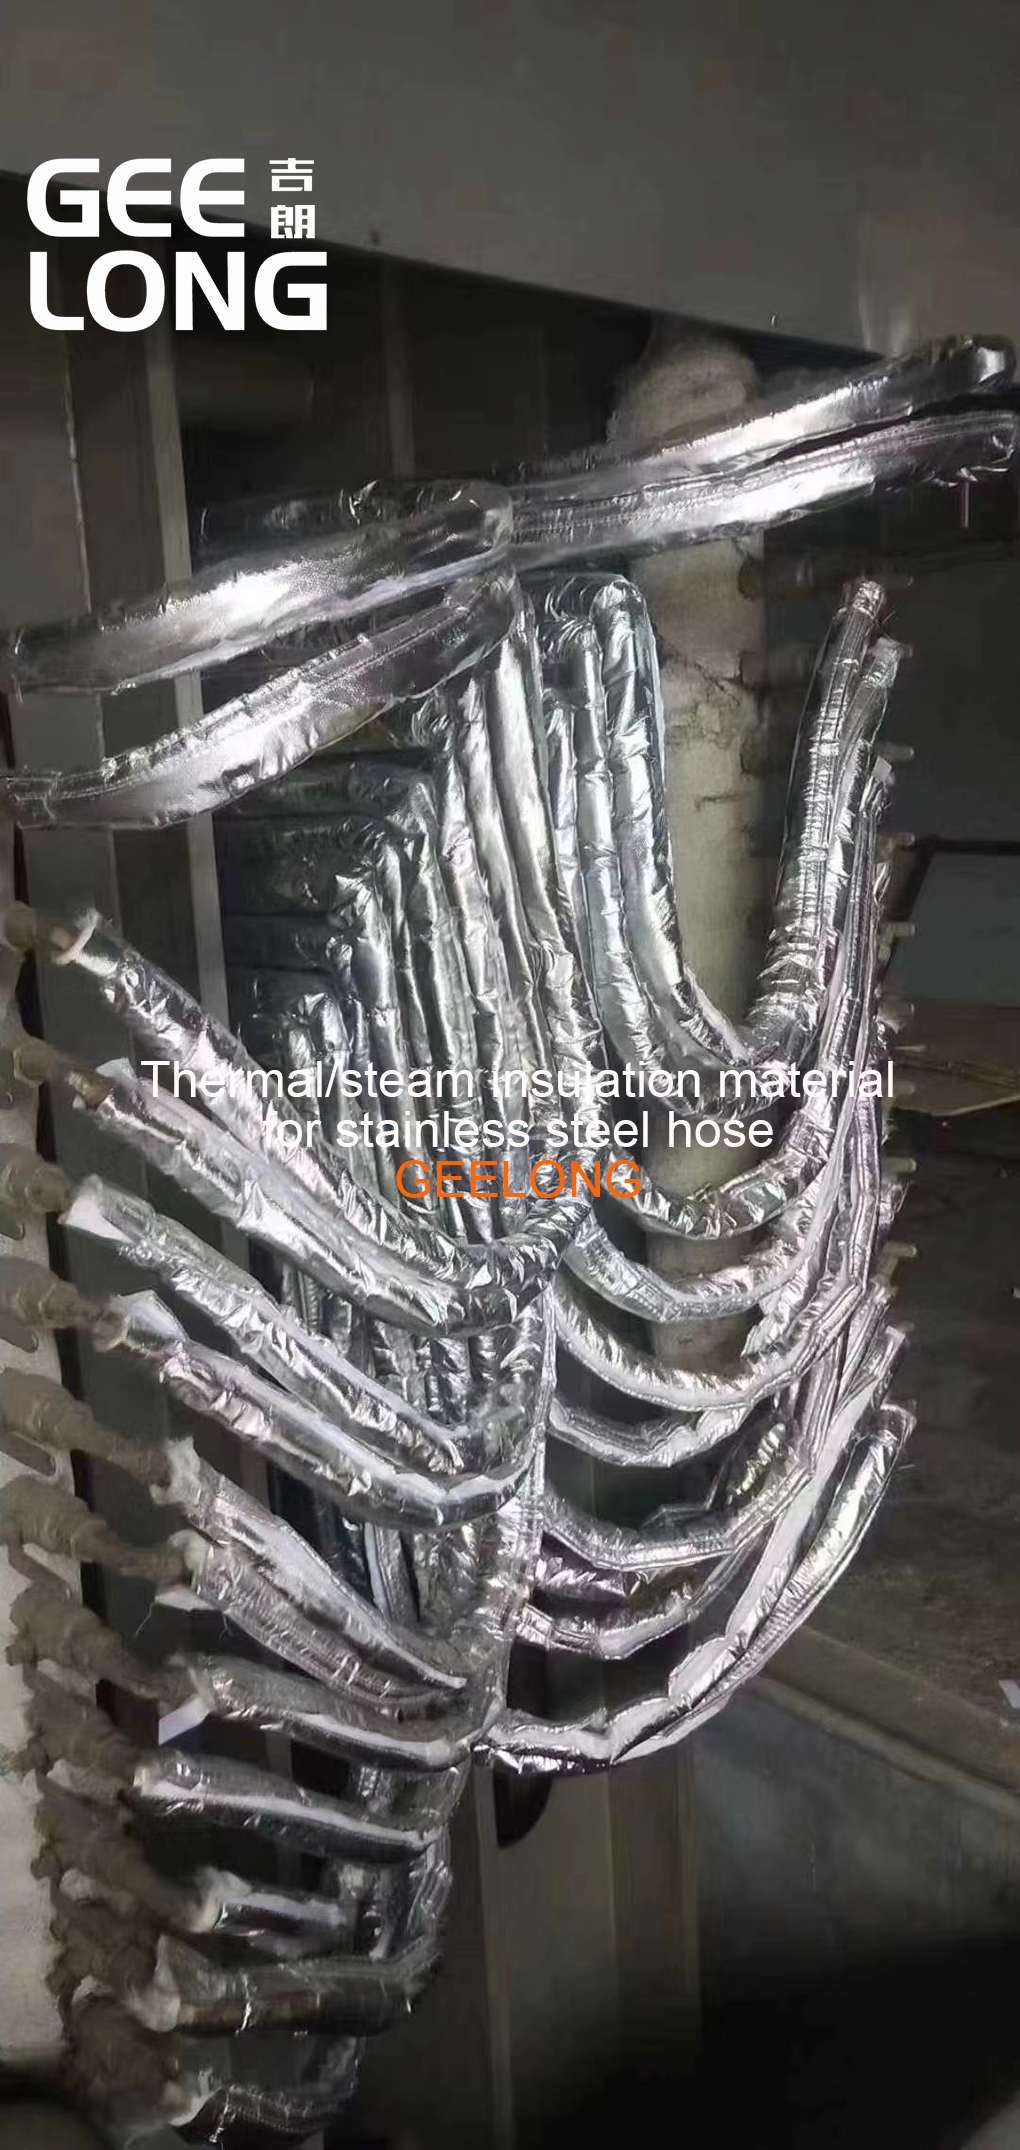 Thermal/steam insulation material for stainless steel hose